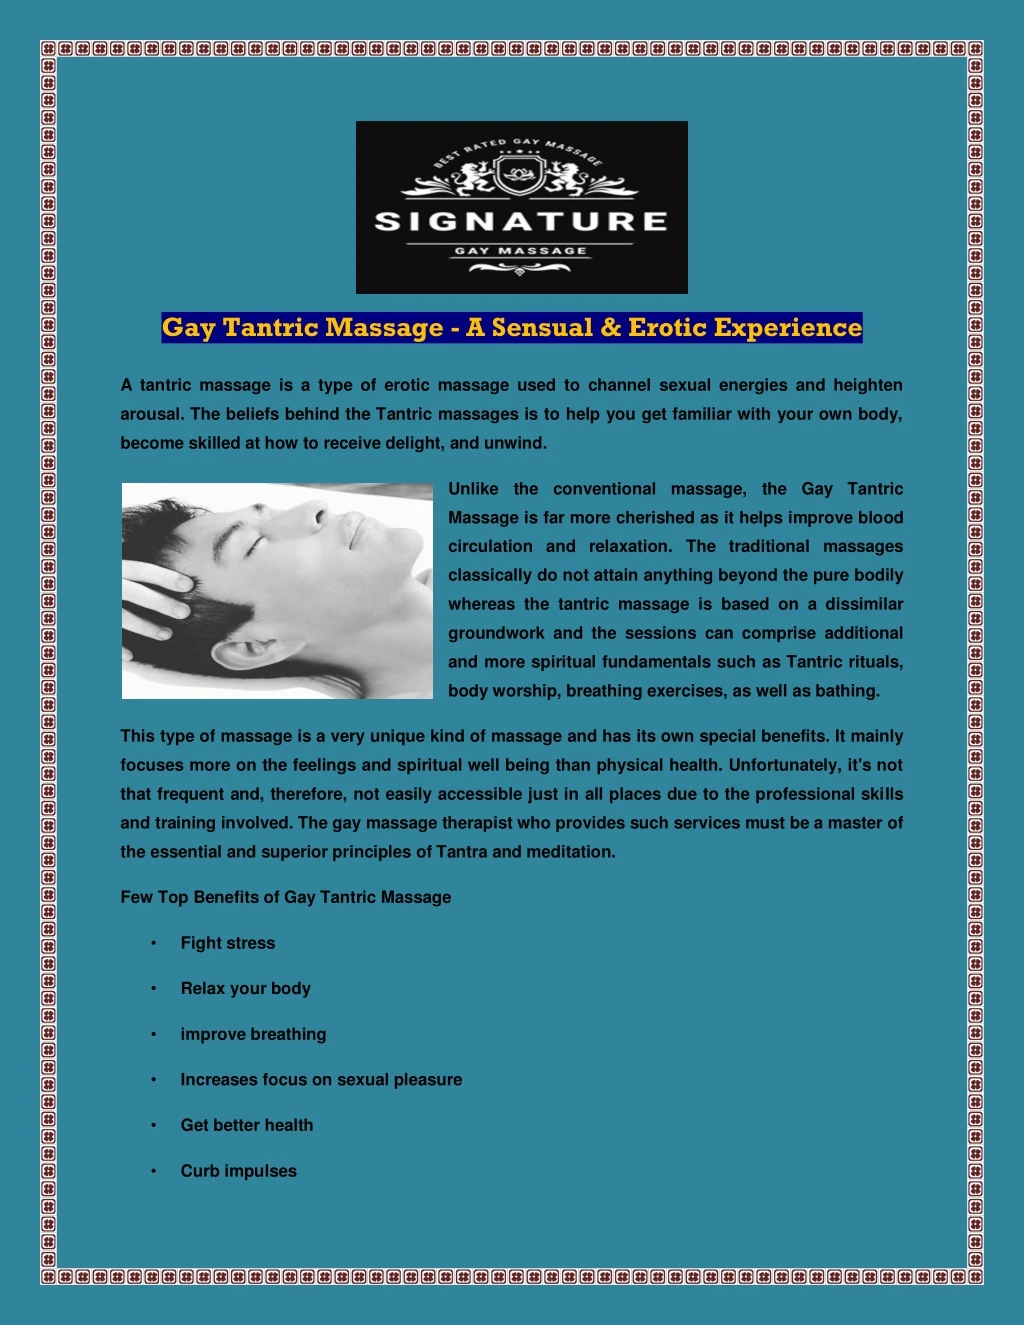 gay tantric massage a sensual erotic experience